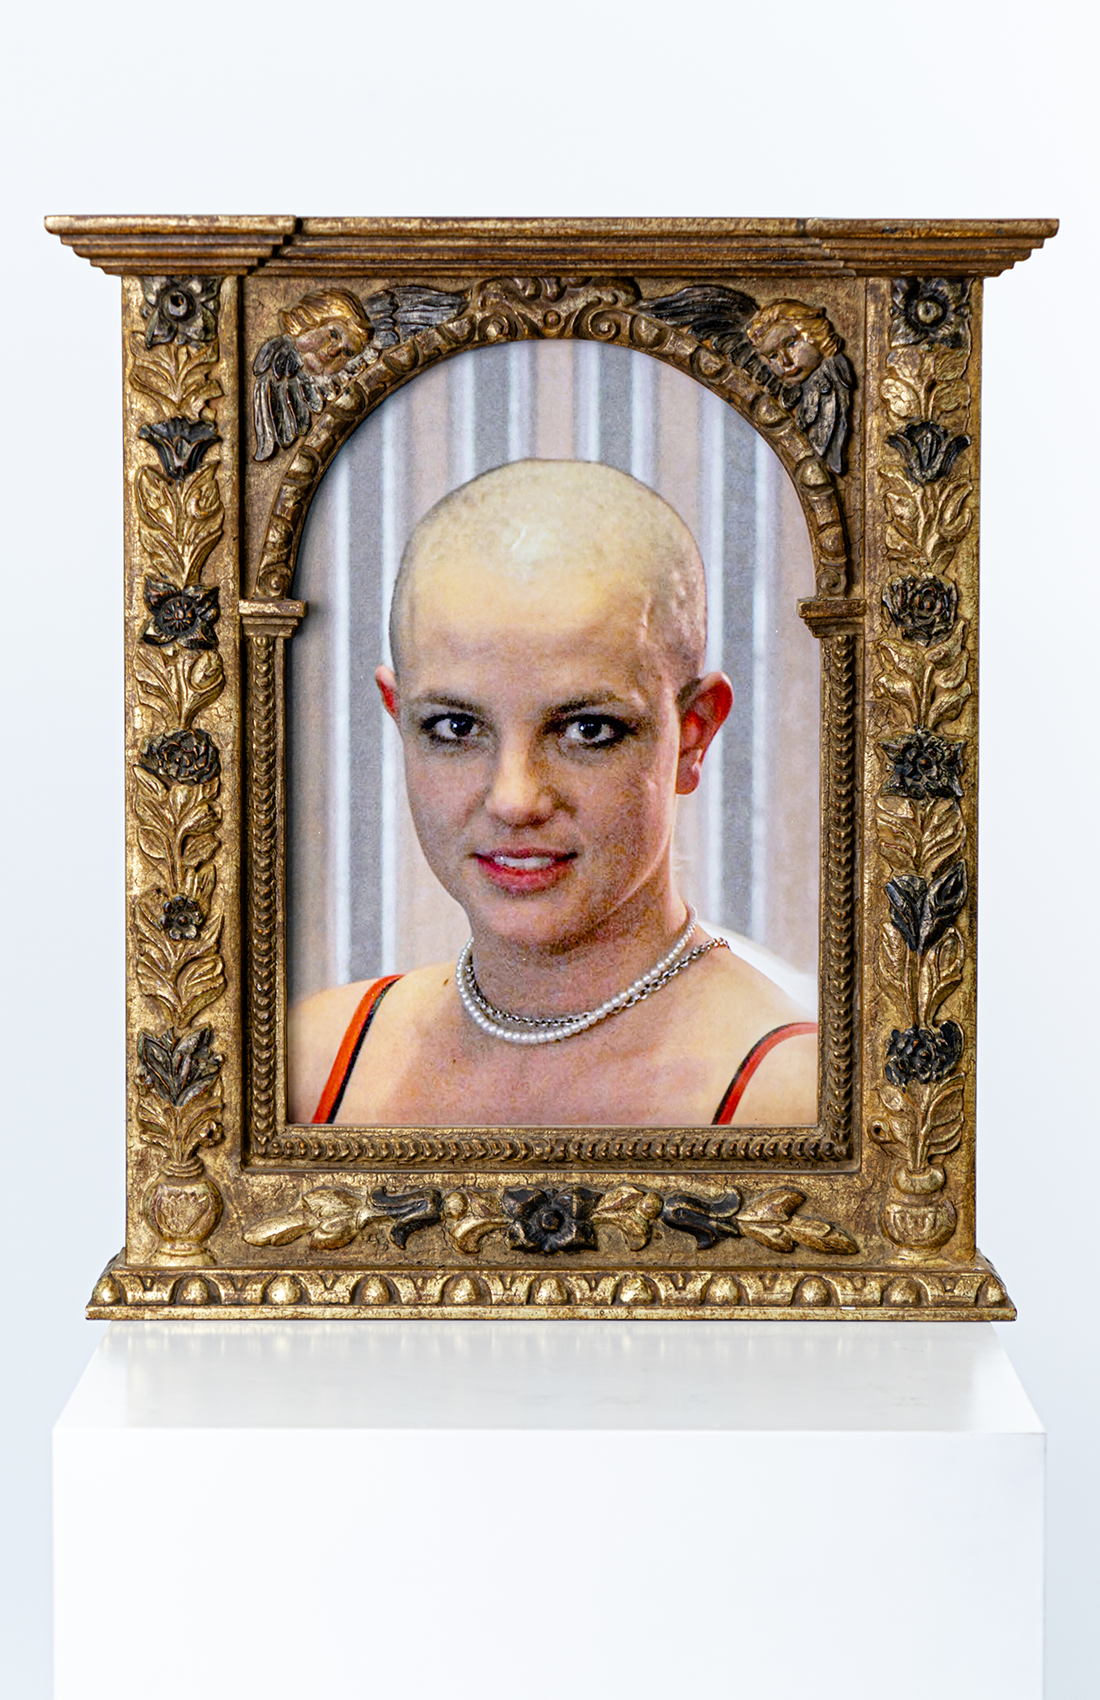 CRAZY BALD BRITNEY SPEARS: THE APPEAL OF THE LOSS OF DESIRABILITY